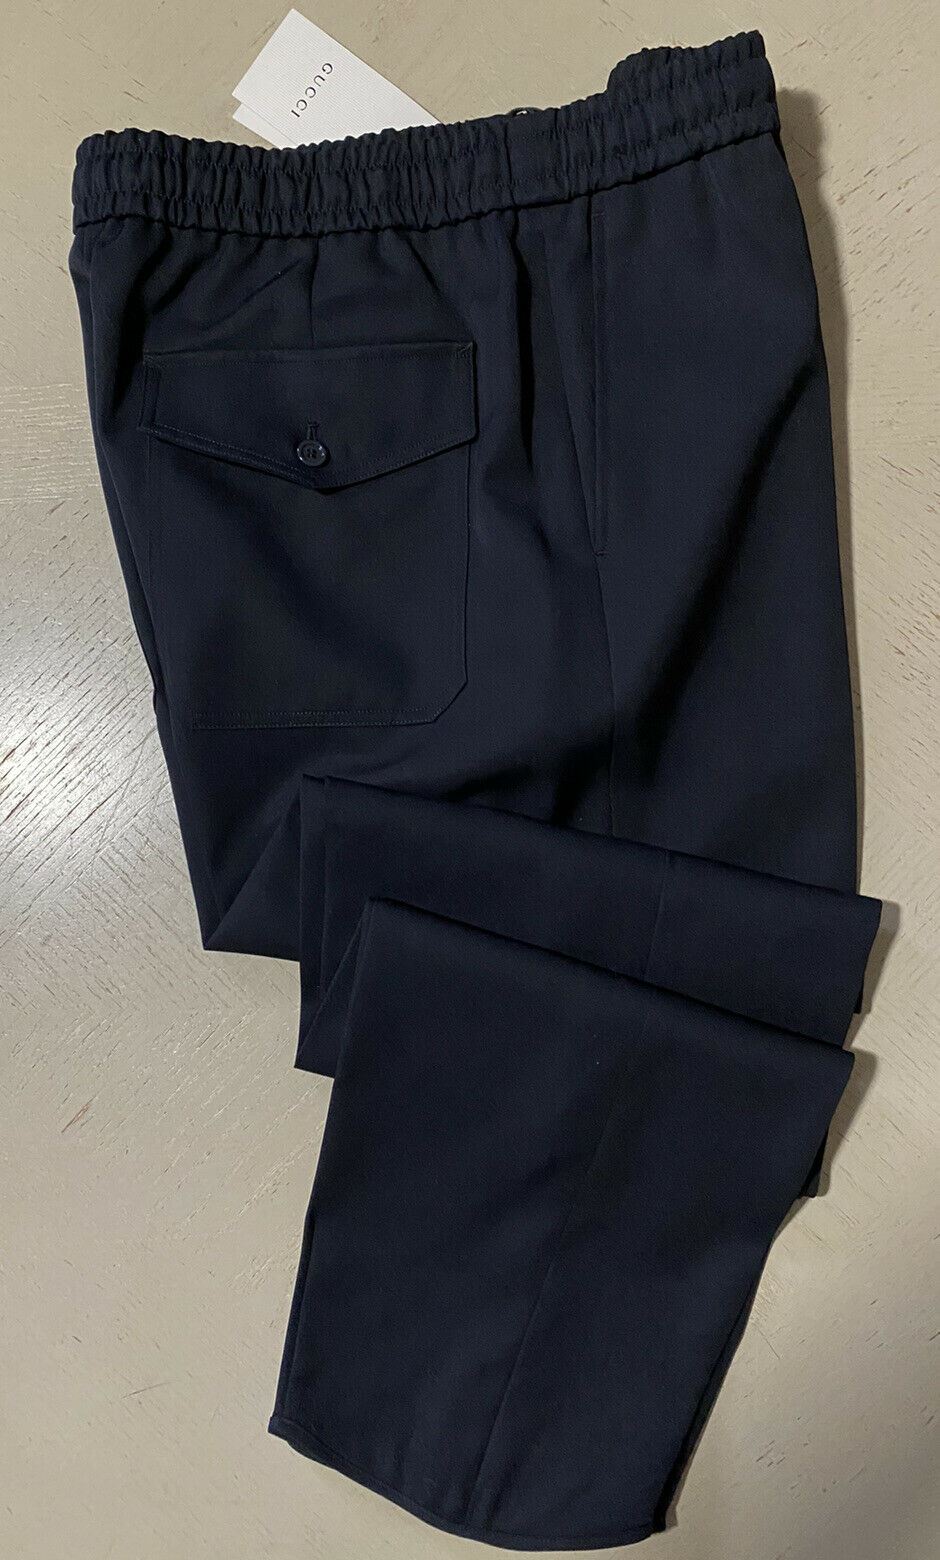 New $1300 Gucci Men’s Wool Jegging  Pants Midnight Blue 34 US ( 50 Eu ) Italy